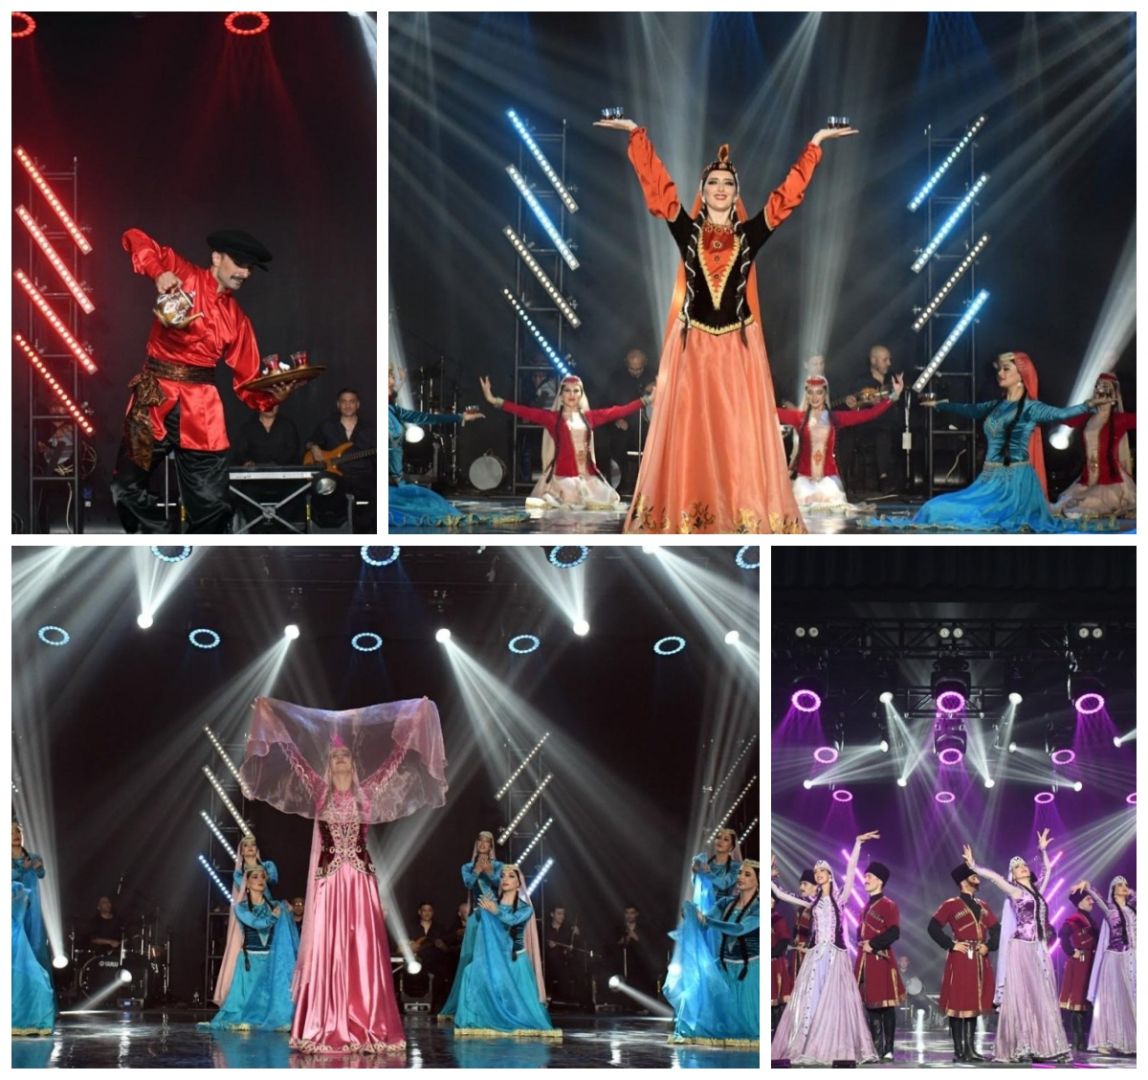 Azerbaijani Culture Days in Tashkent fosters ties between two nations [PHOTOS]